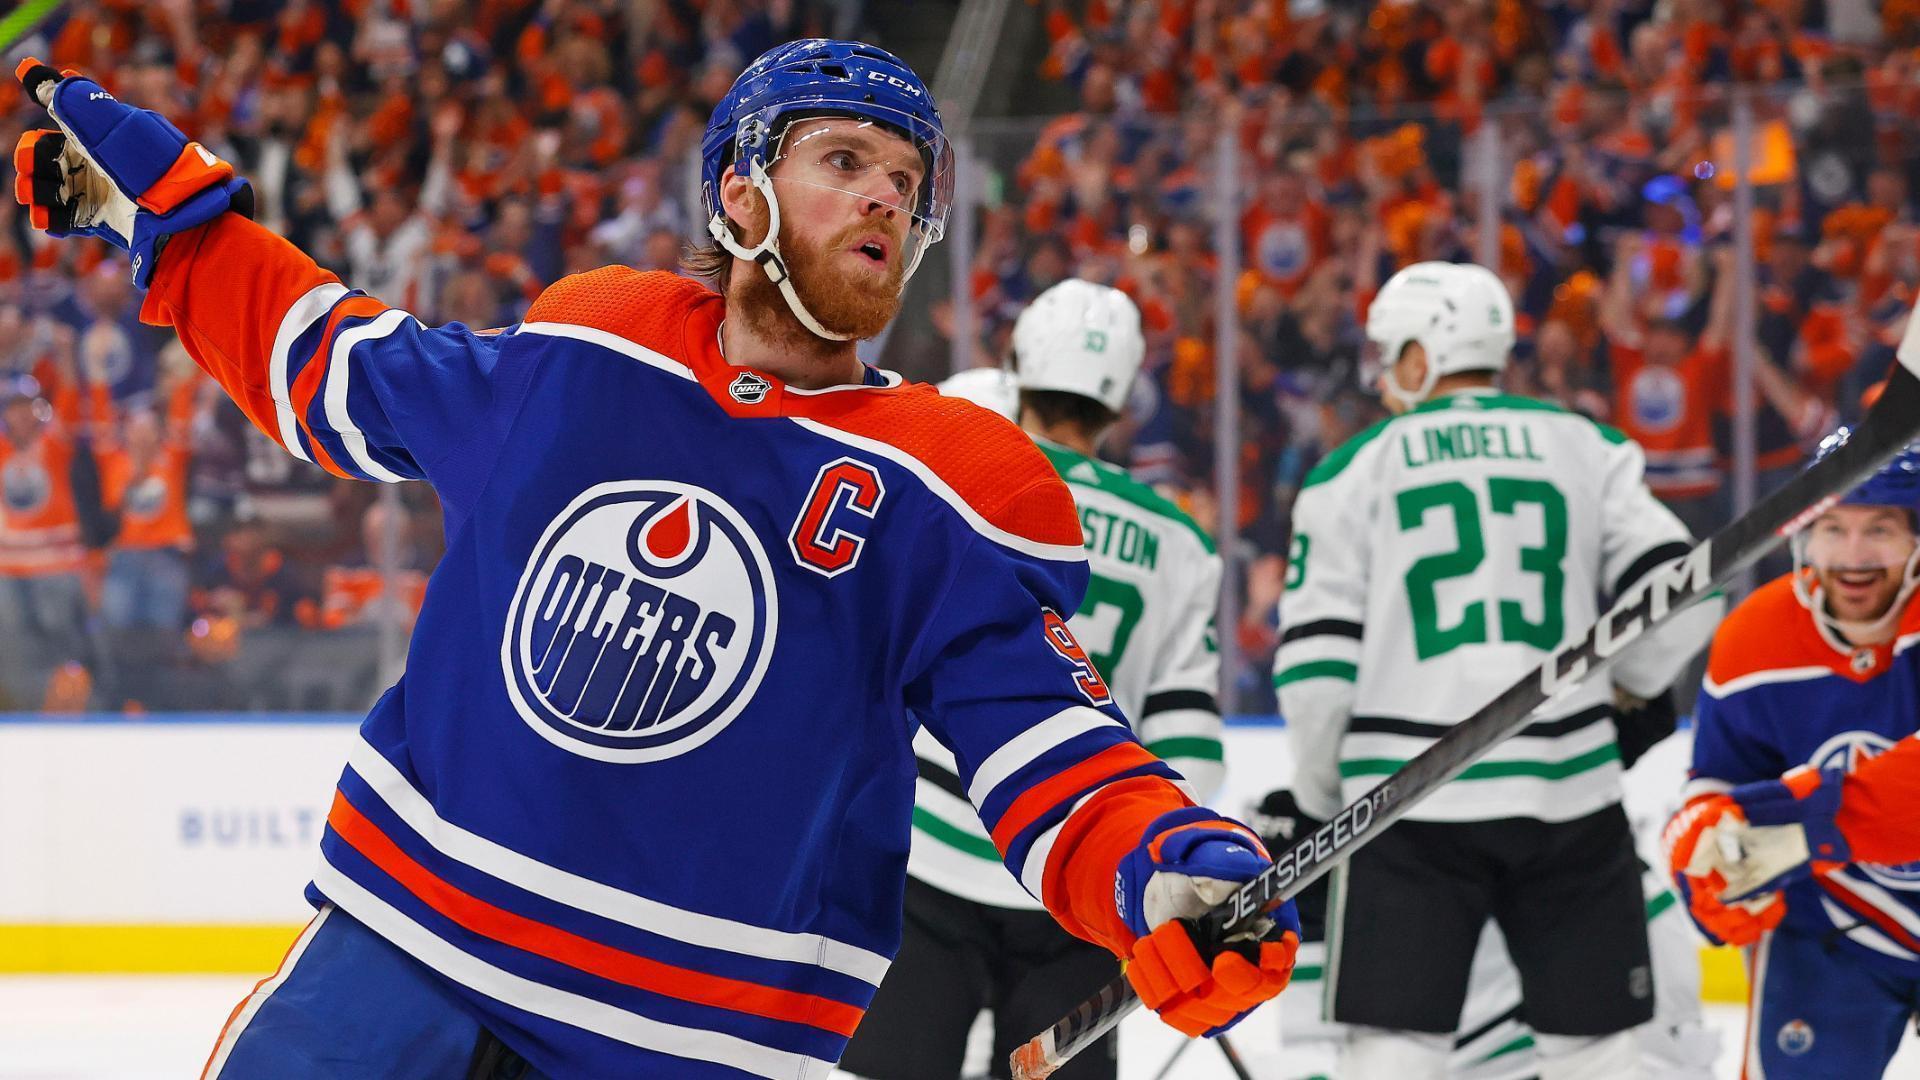 Connor McDavid's power-play goal opens the scoring in Game 6